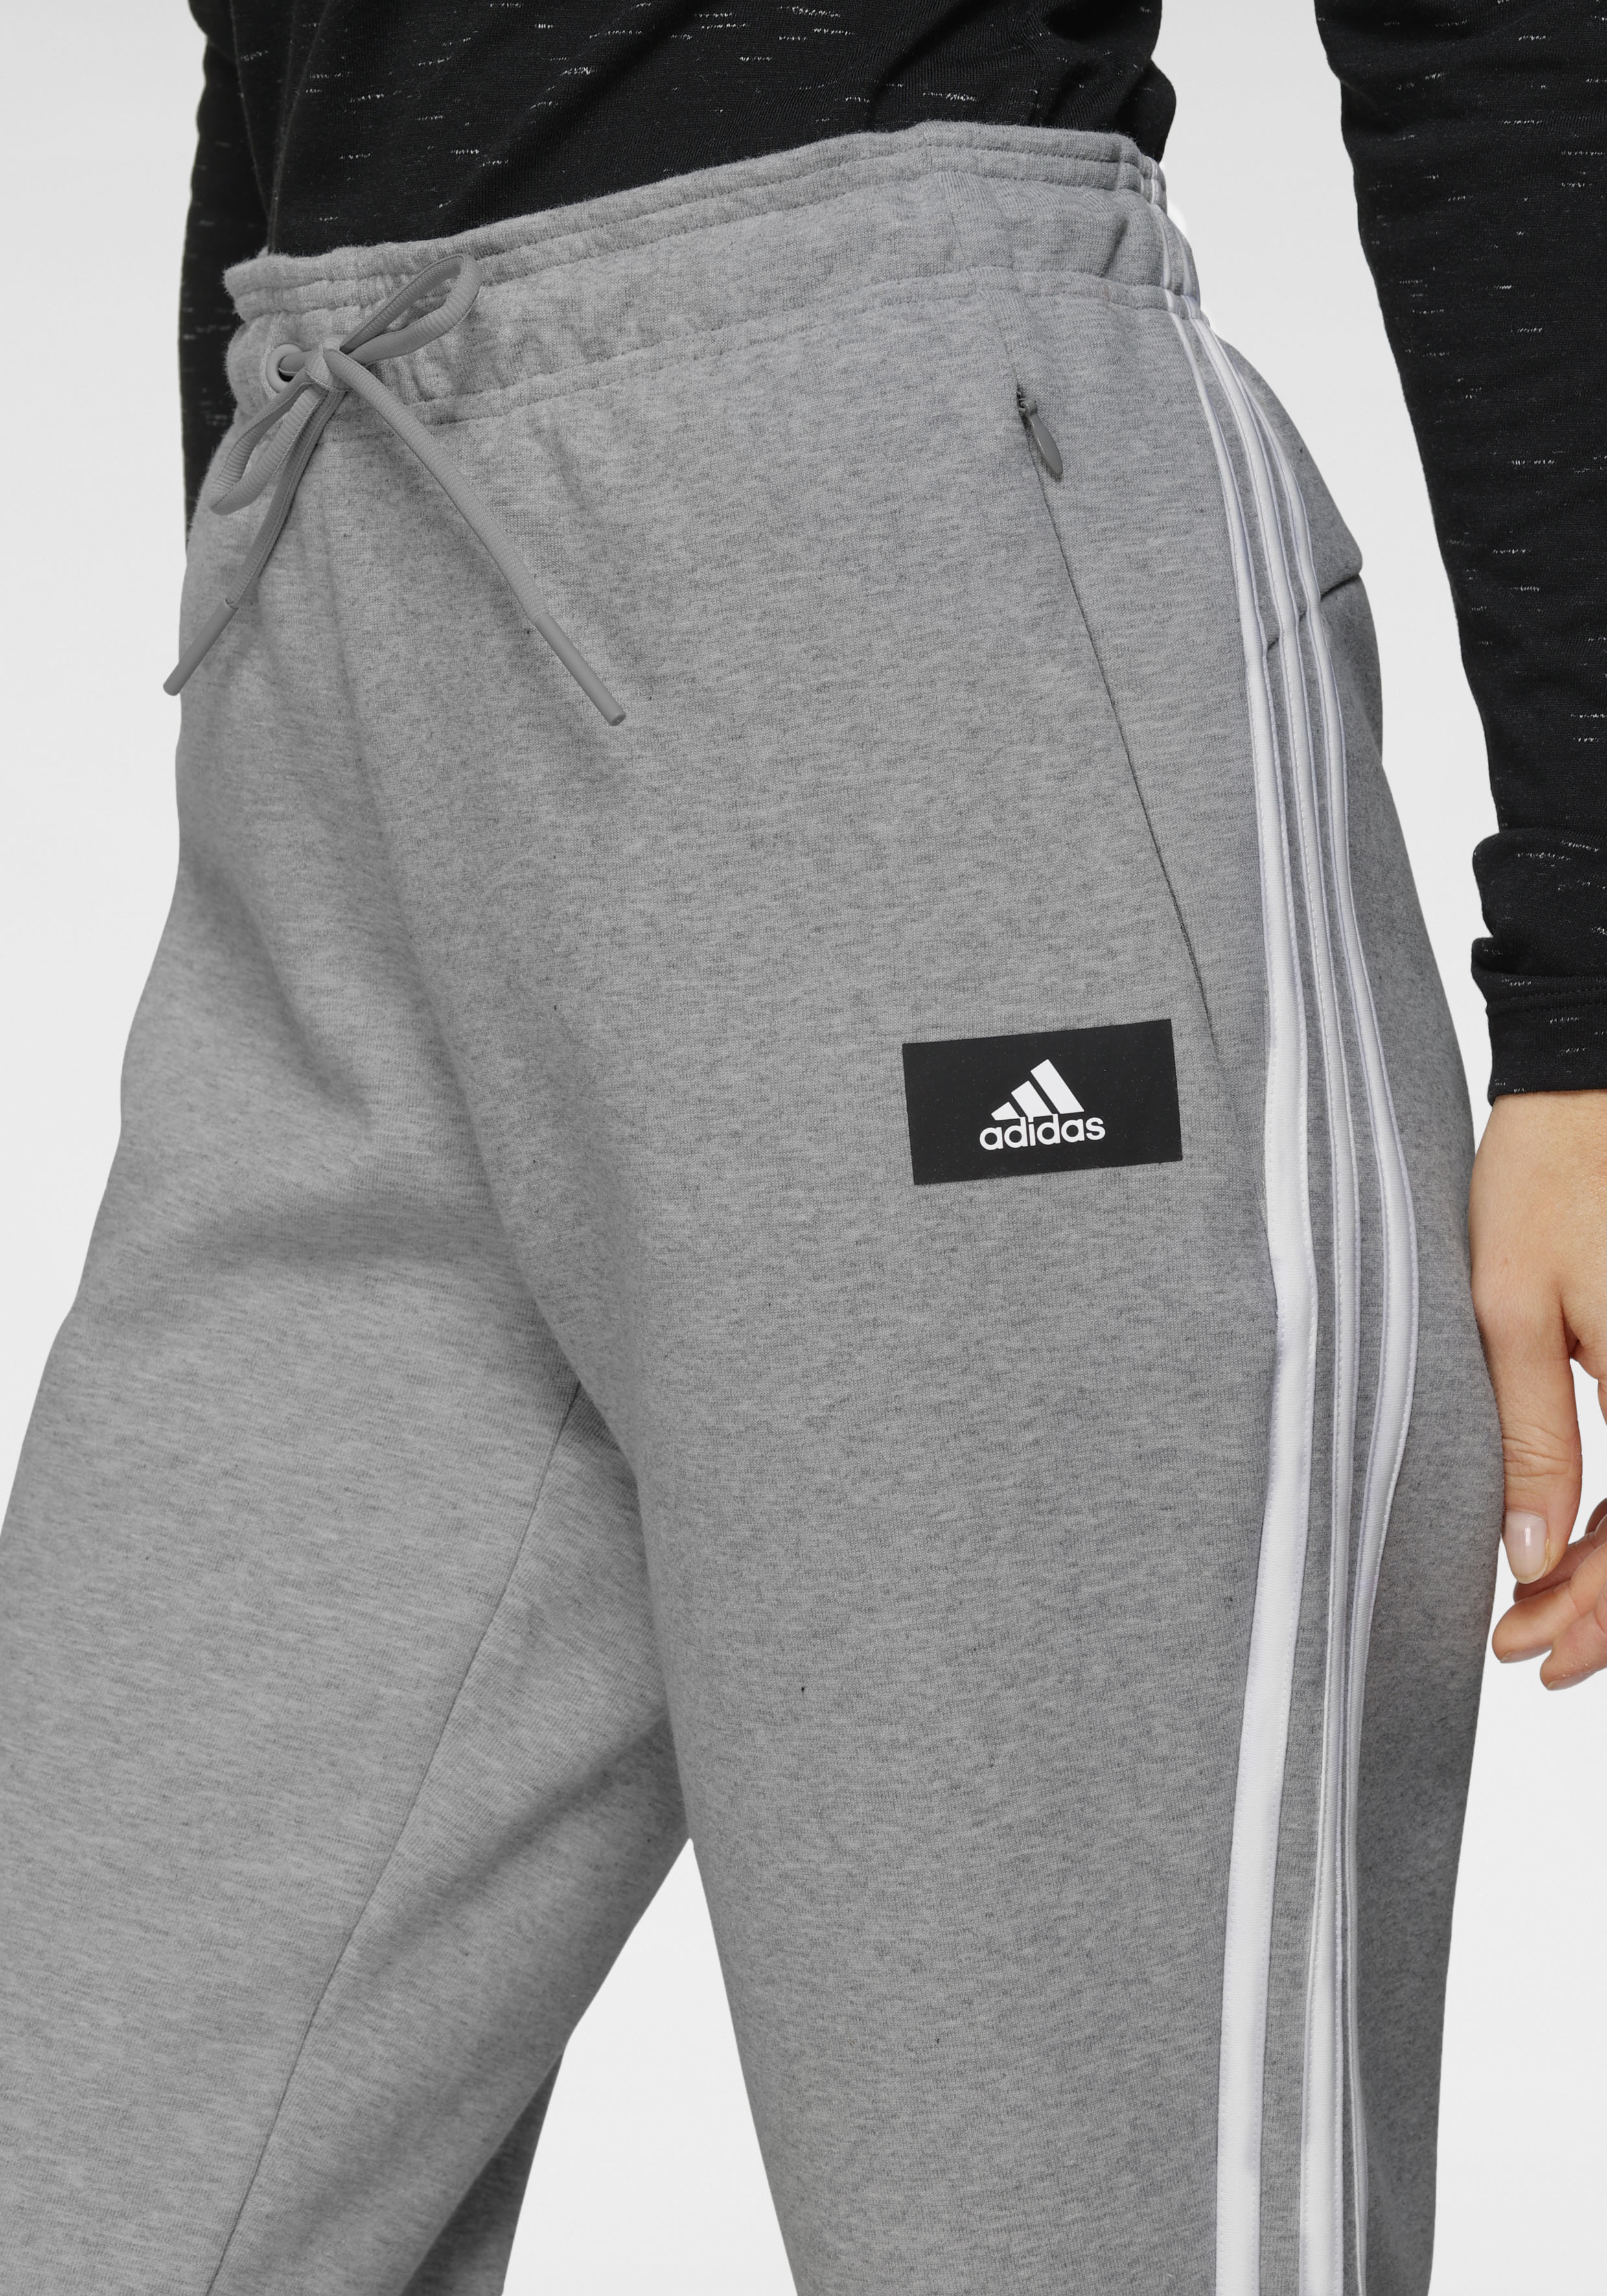 ADIDAS PERFORMANCE Sporthose in Graumeliert 